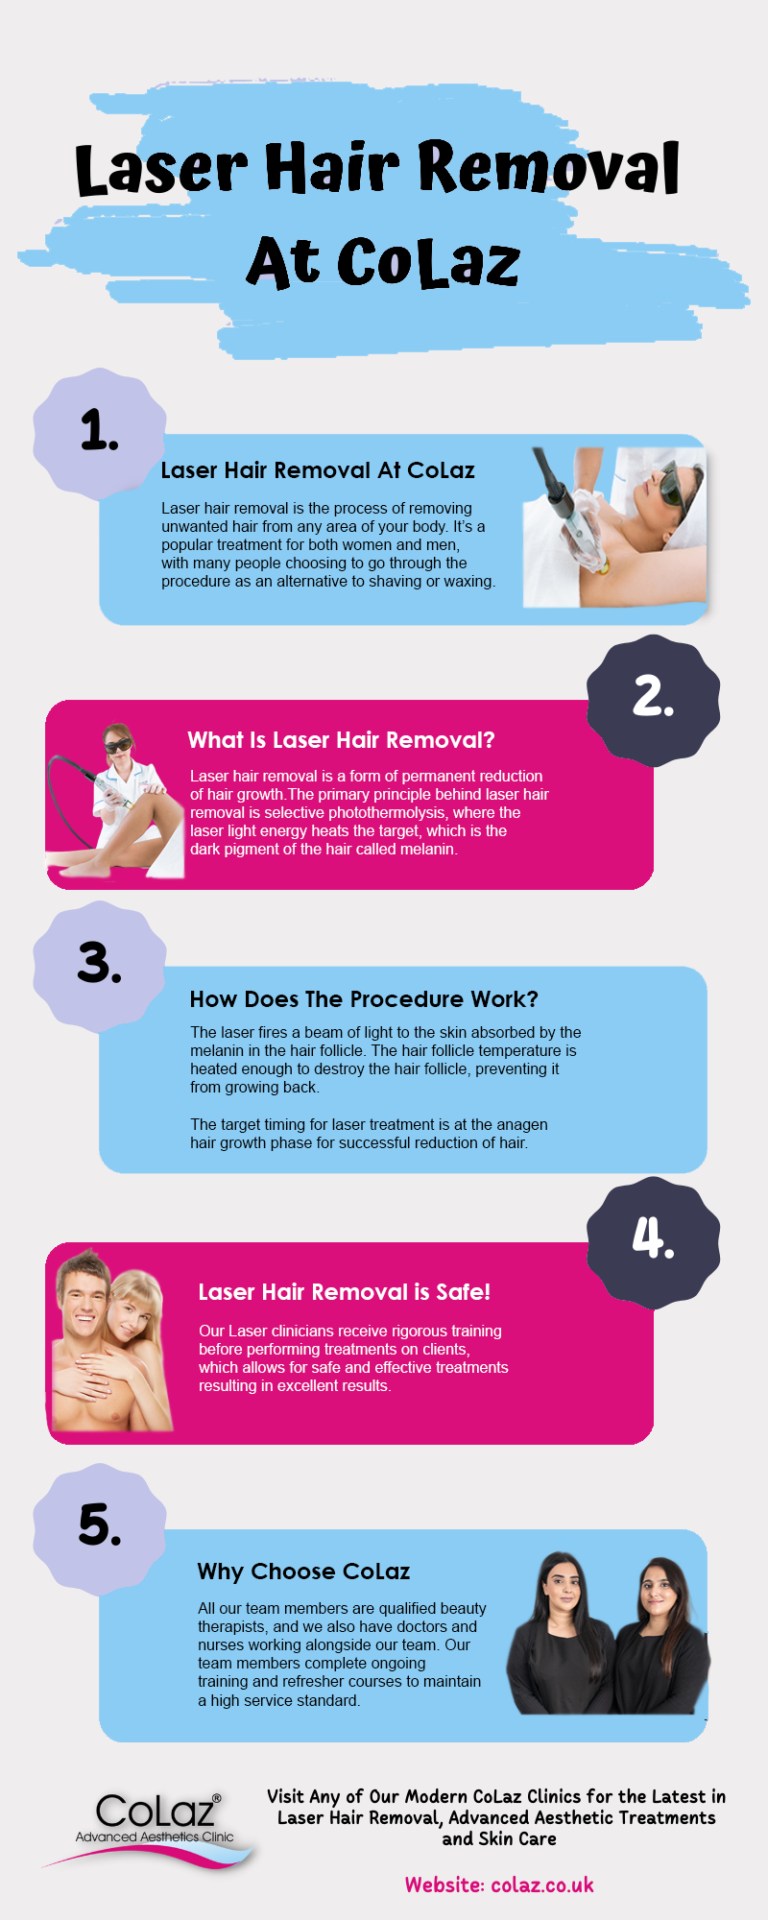 » Laser Hair Removal Benefits